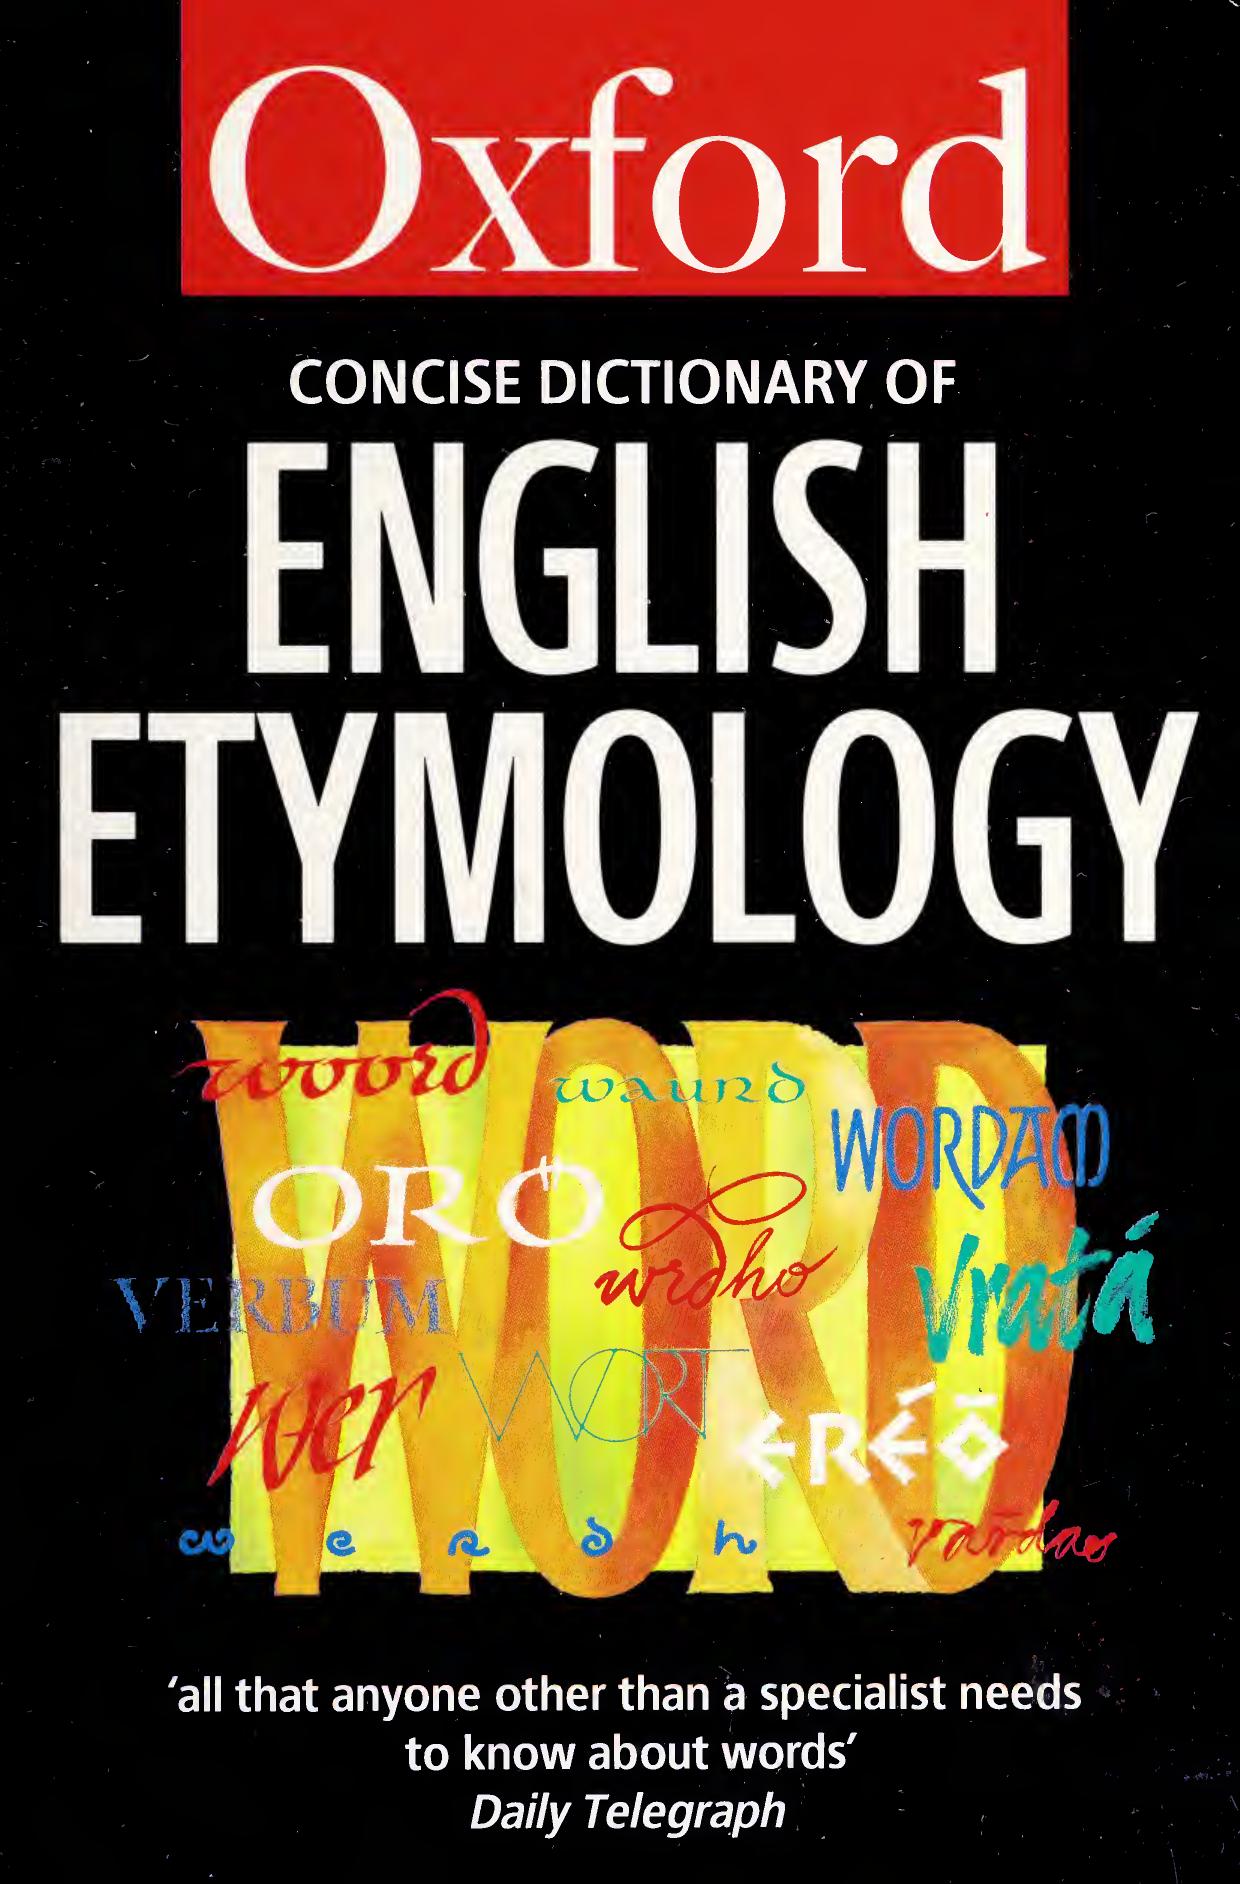 The concise Oxford dictionary of English etymology [electronic resource]